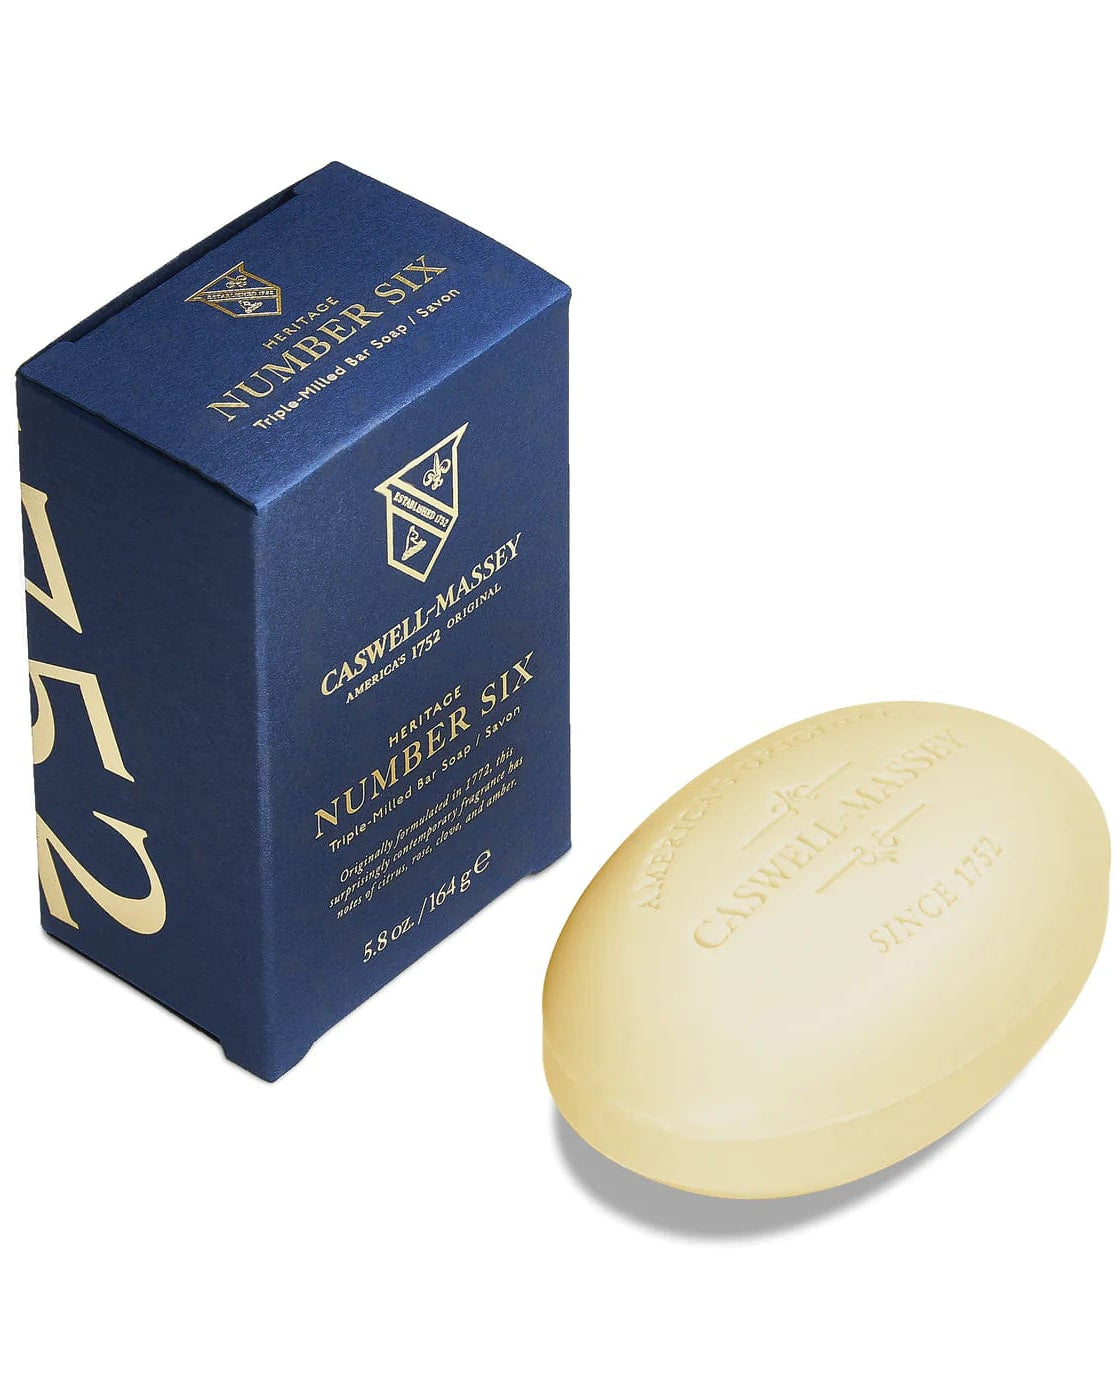 Caswell-Massey Men's Accessories Number Six / 5.8oz Caswell-Massey - Number Six Bar Soap 5.8oz